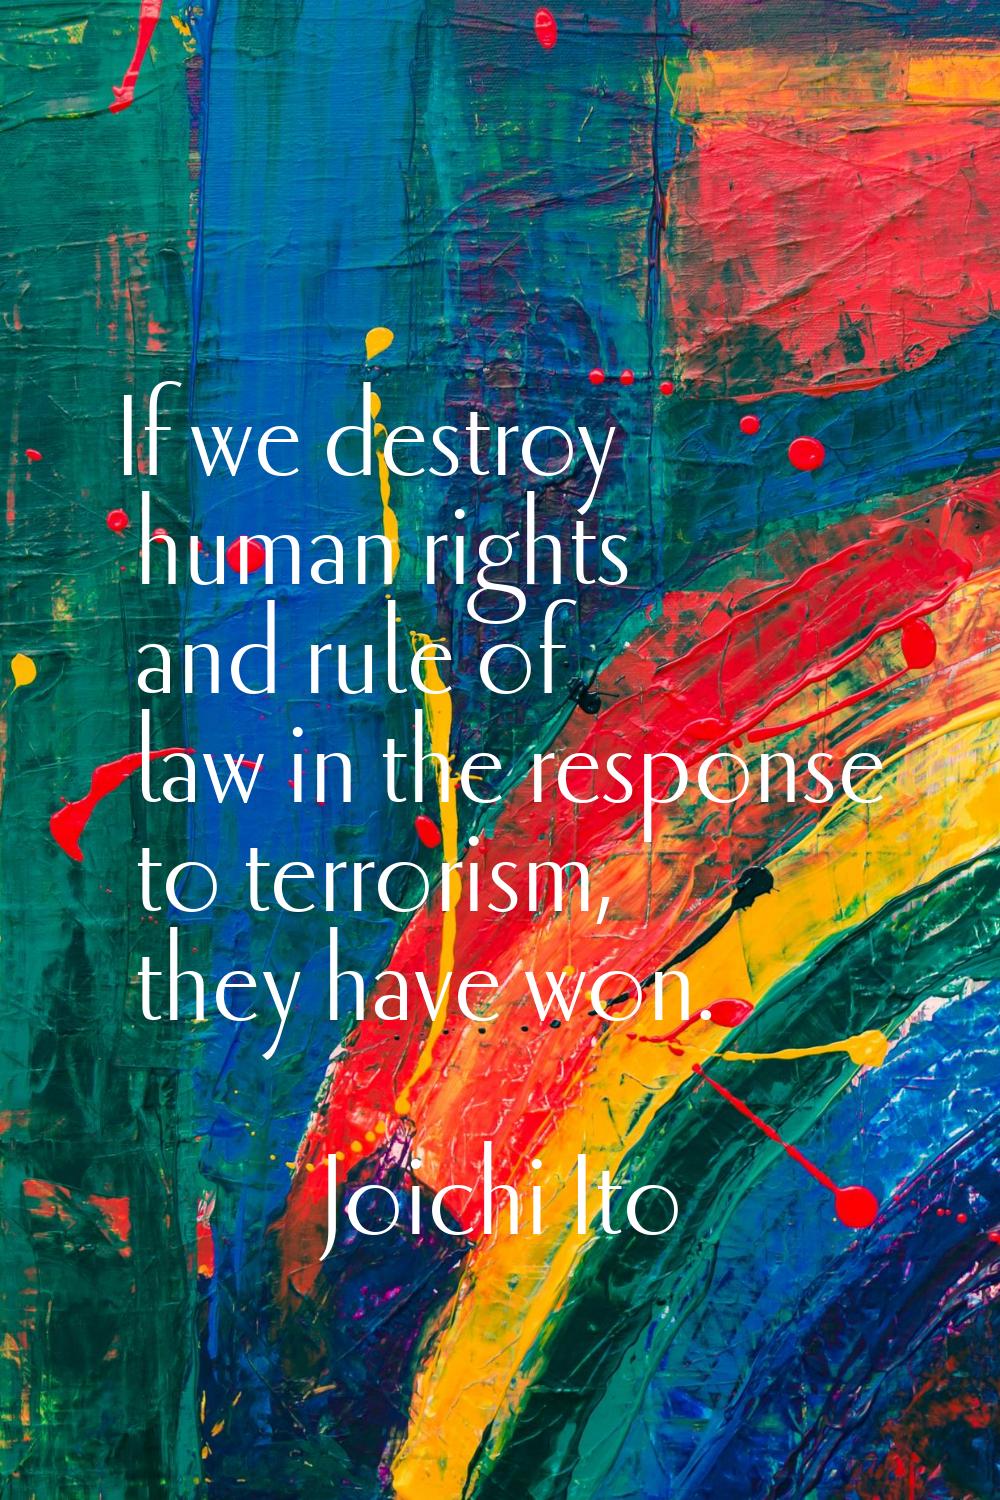 If we destroy human rights and rule of law in the response to terrorism, they have won.